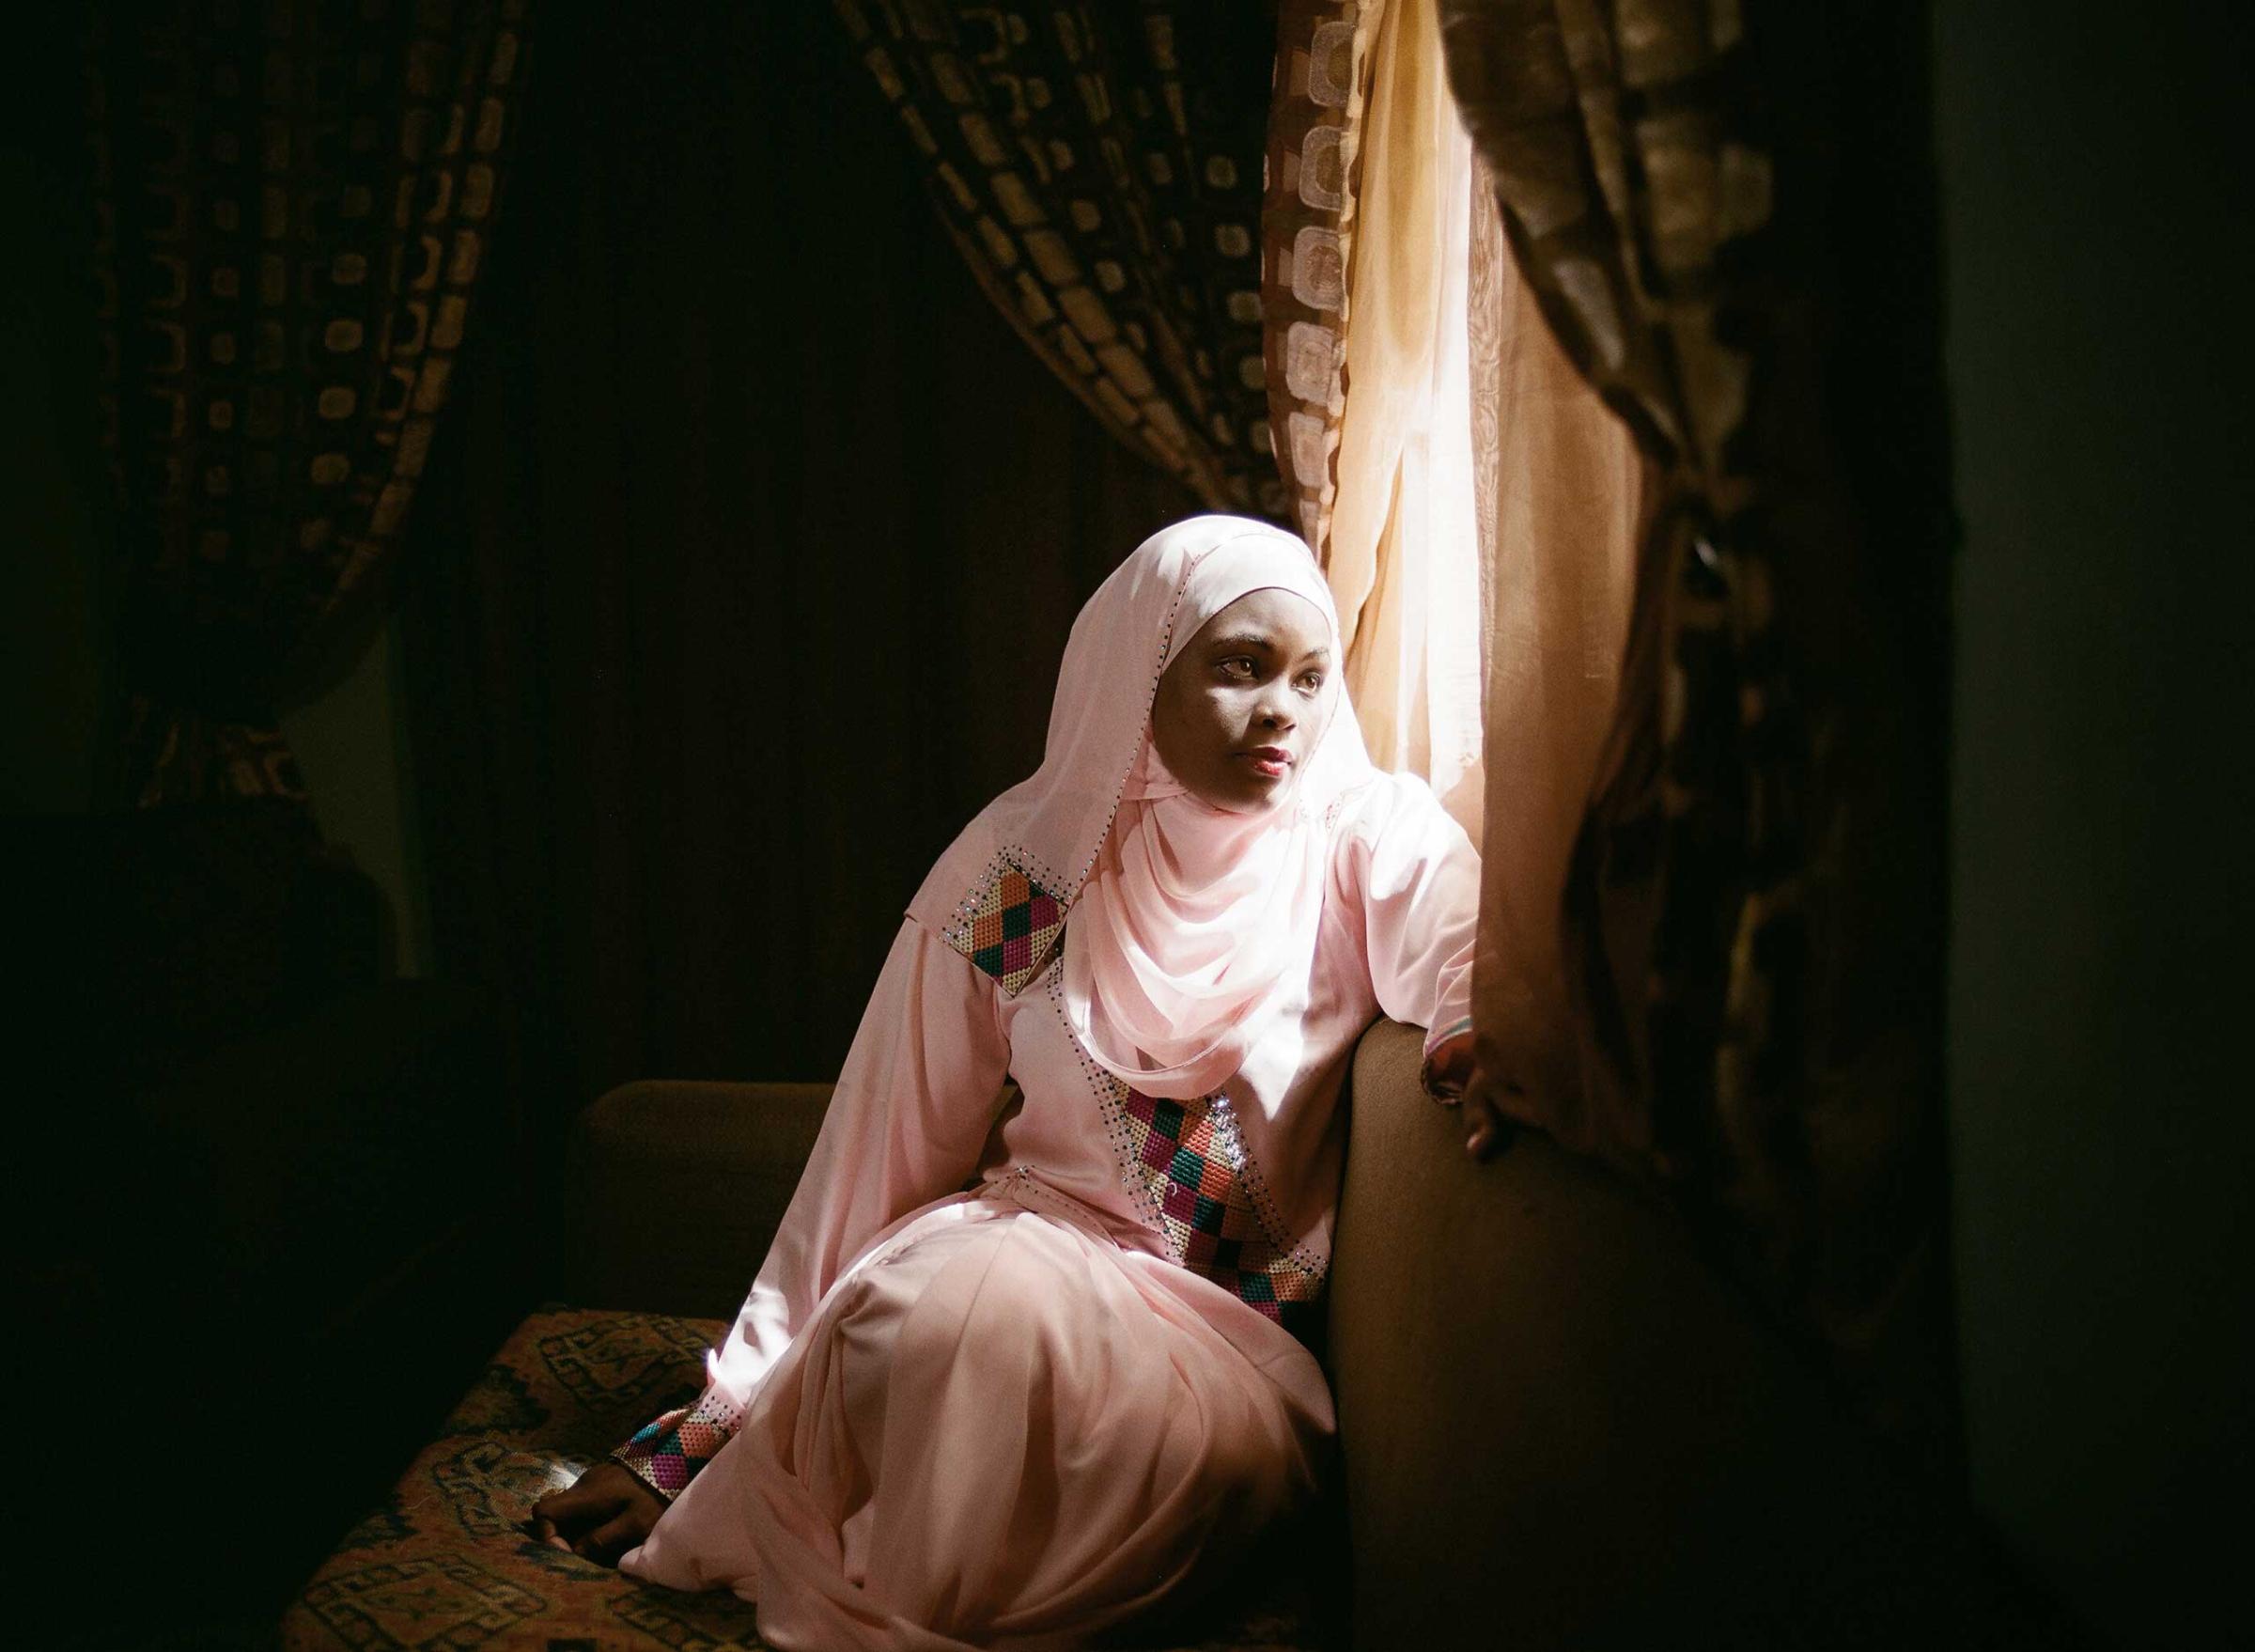 Farida Ado, age 27, is a romance novelist, one of a small but significant contingent of women in Northern Nigeria writing books called Littattafan soyayya, Hausa for “love literature,” Kano ,April 15, 2013.